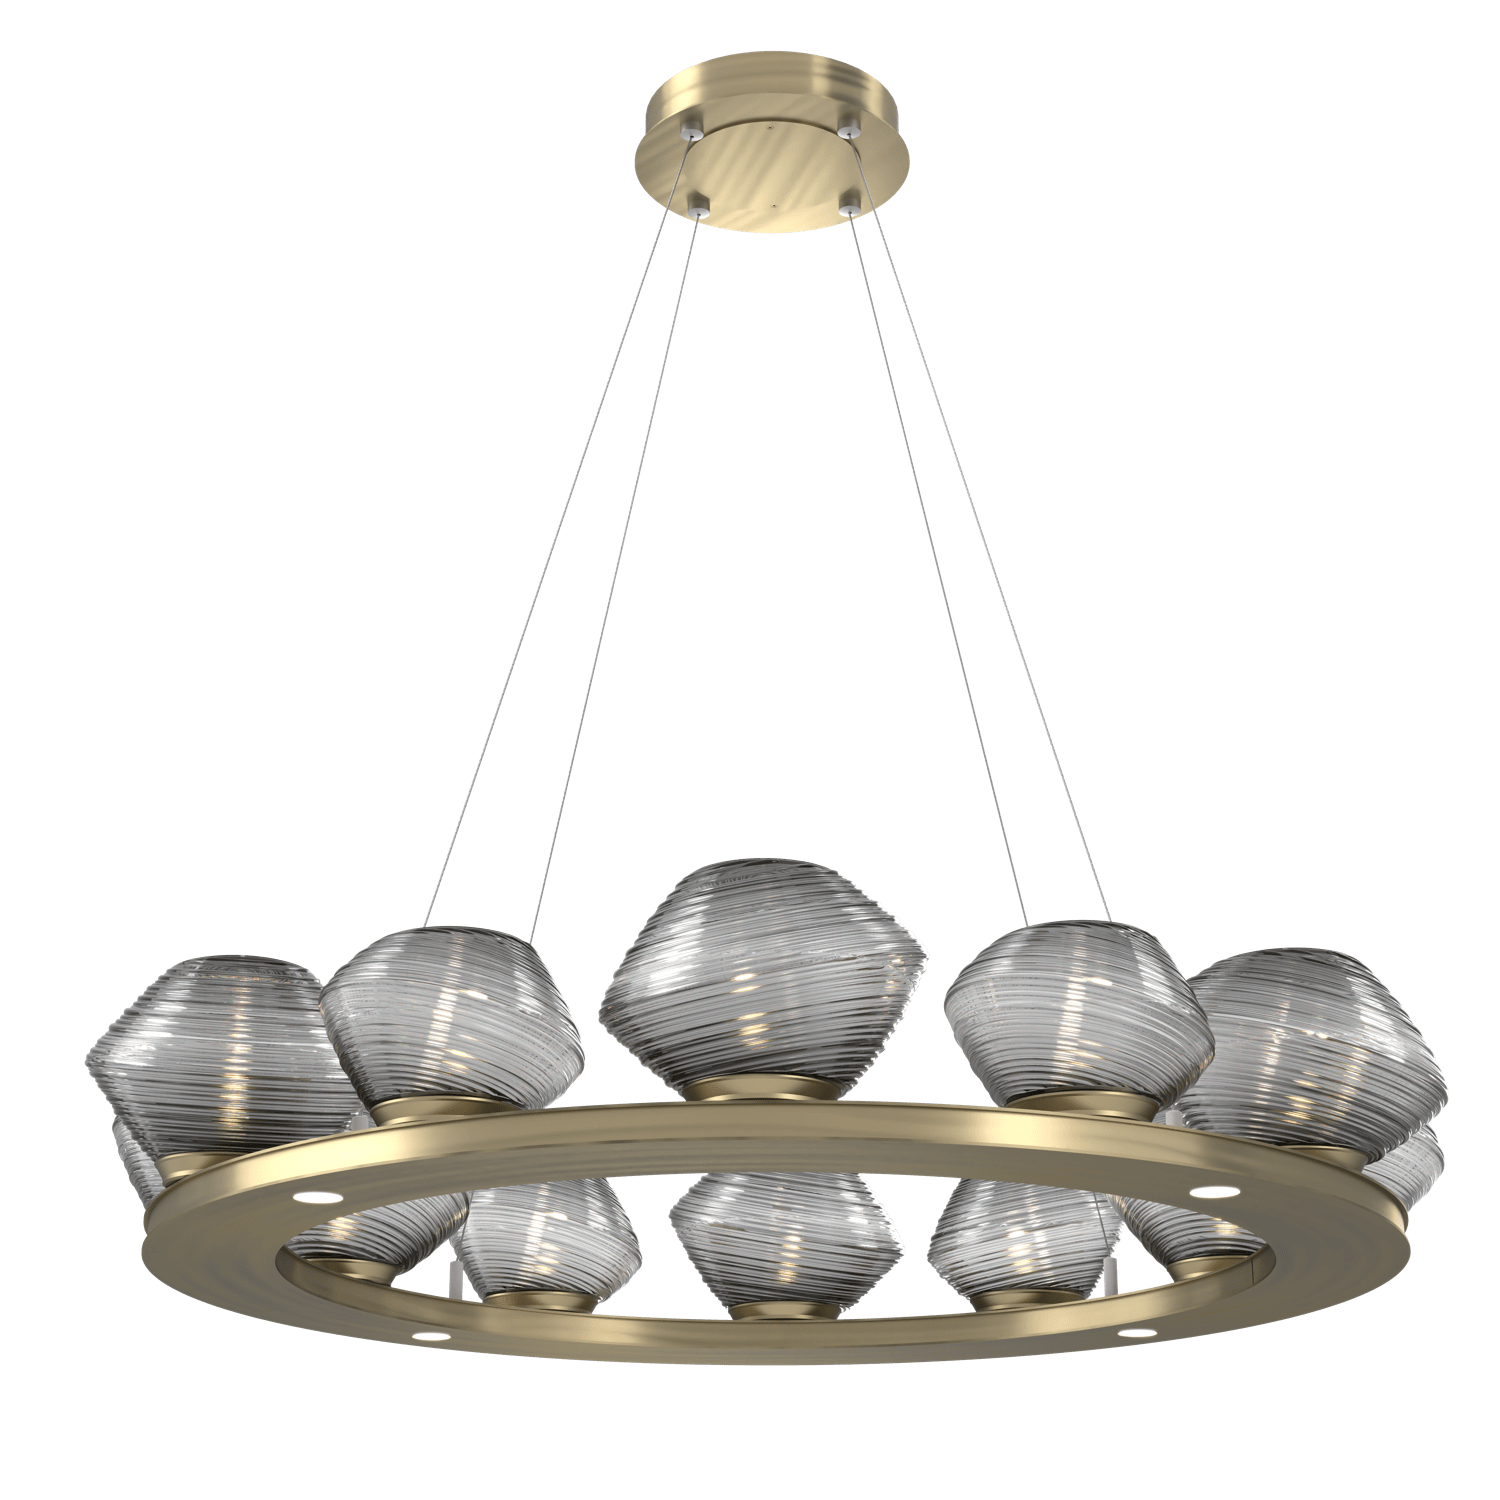 CHB0089-0C-HB-S-Hammerton-Studio-Mesa-36-inch-ring-chandelier-with-heritage-brass-finish-and-smoke-blown-glass-shades-and-LED-lamping